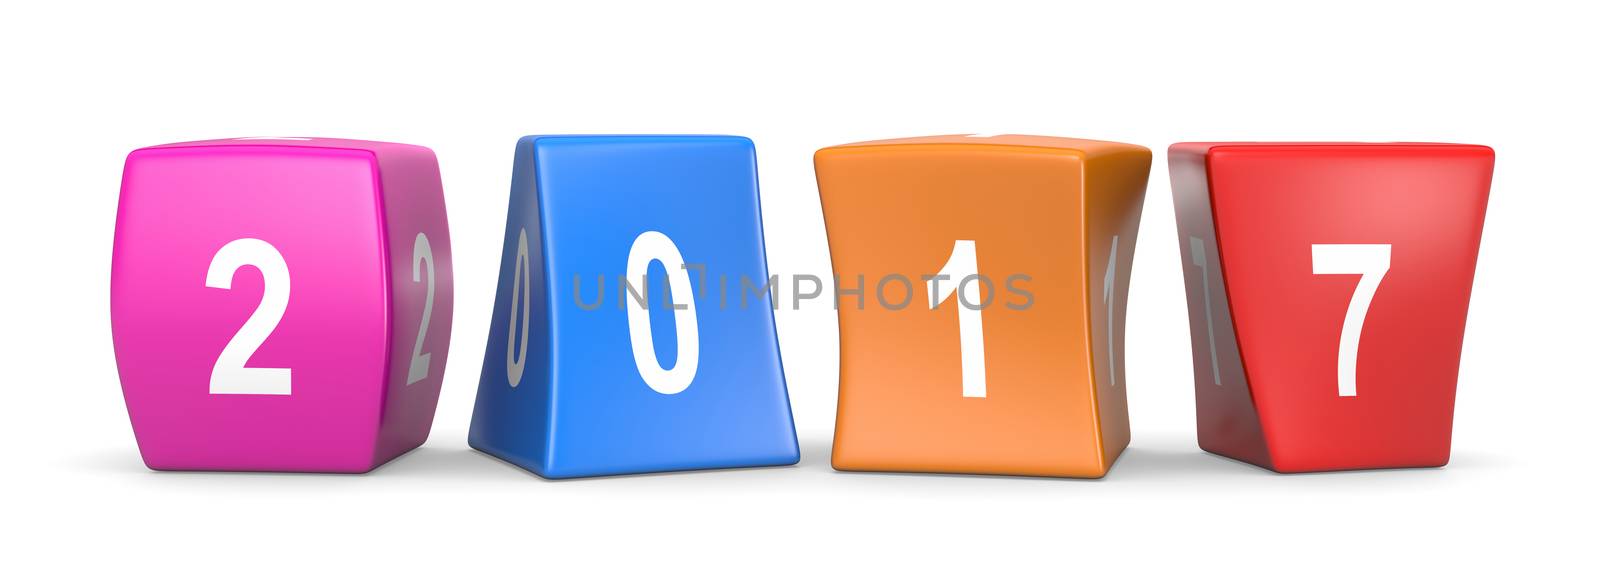 2017 White Text on Colorful Deformed Funny Cubes 3D Illustration on White Background